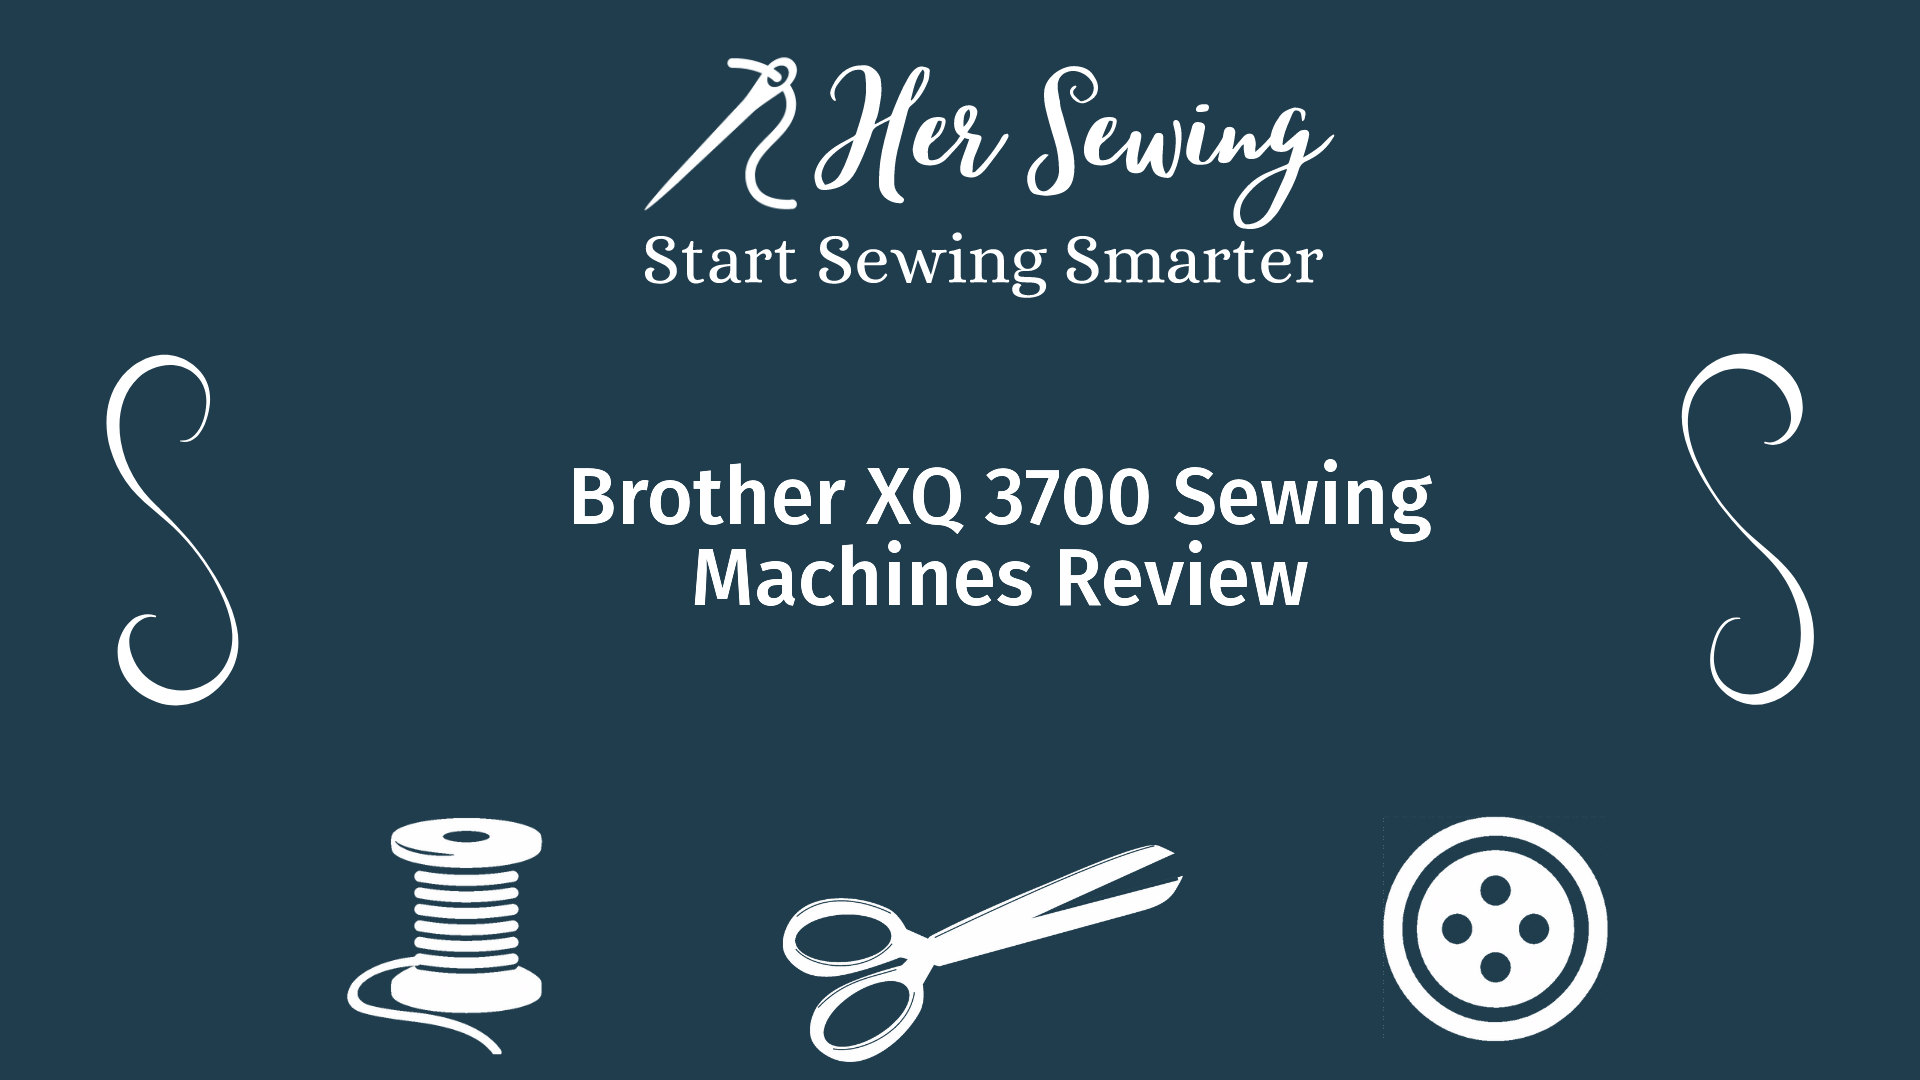 Brother XQ 3700 Sewing Machines Review